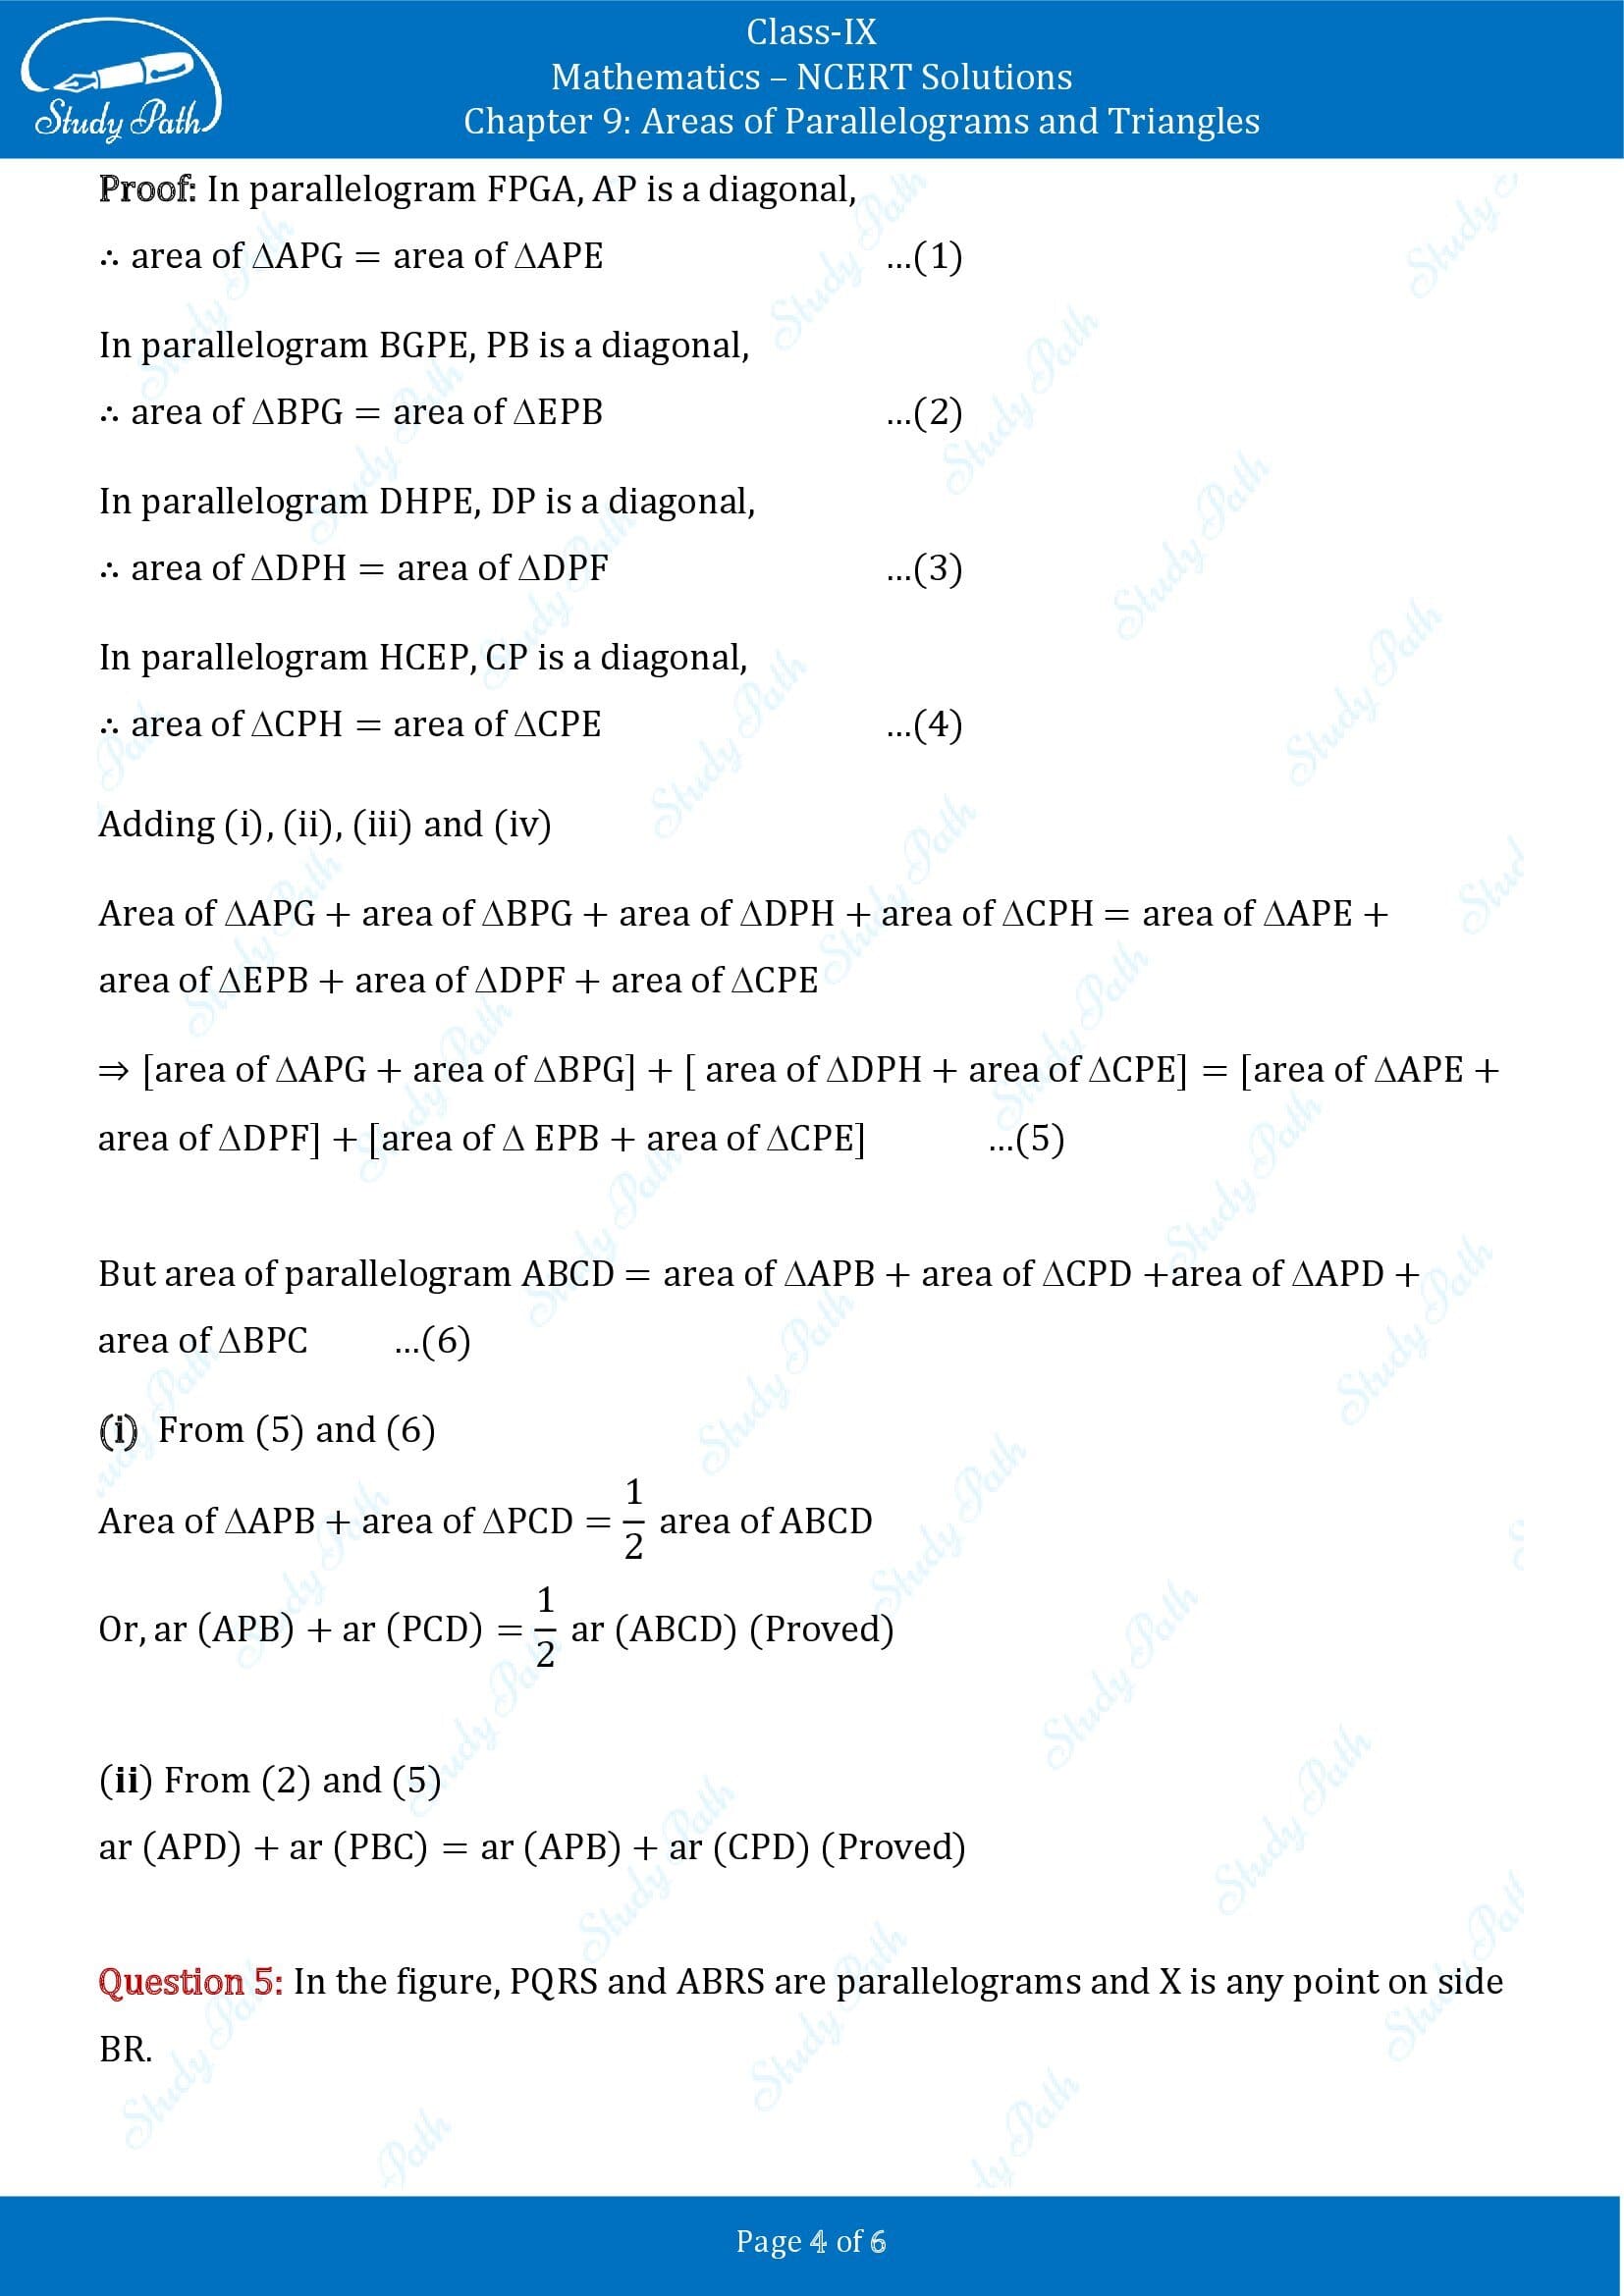 NCERT Solutions for Class 9 Maths Chapter 9 Areas of Parallelograms and Triangles Exercise 9.2 00004